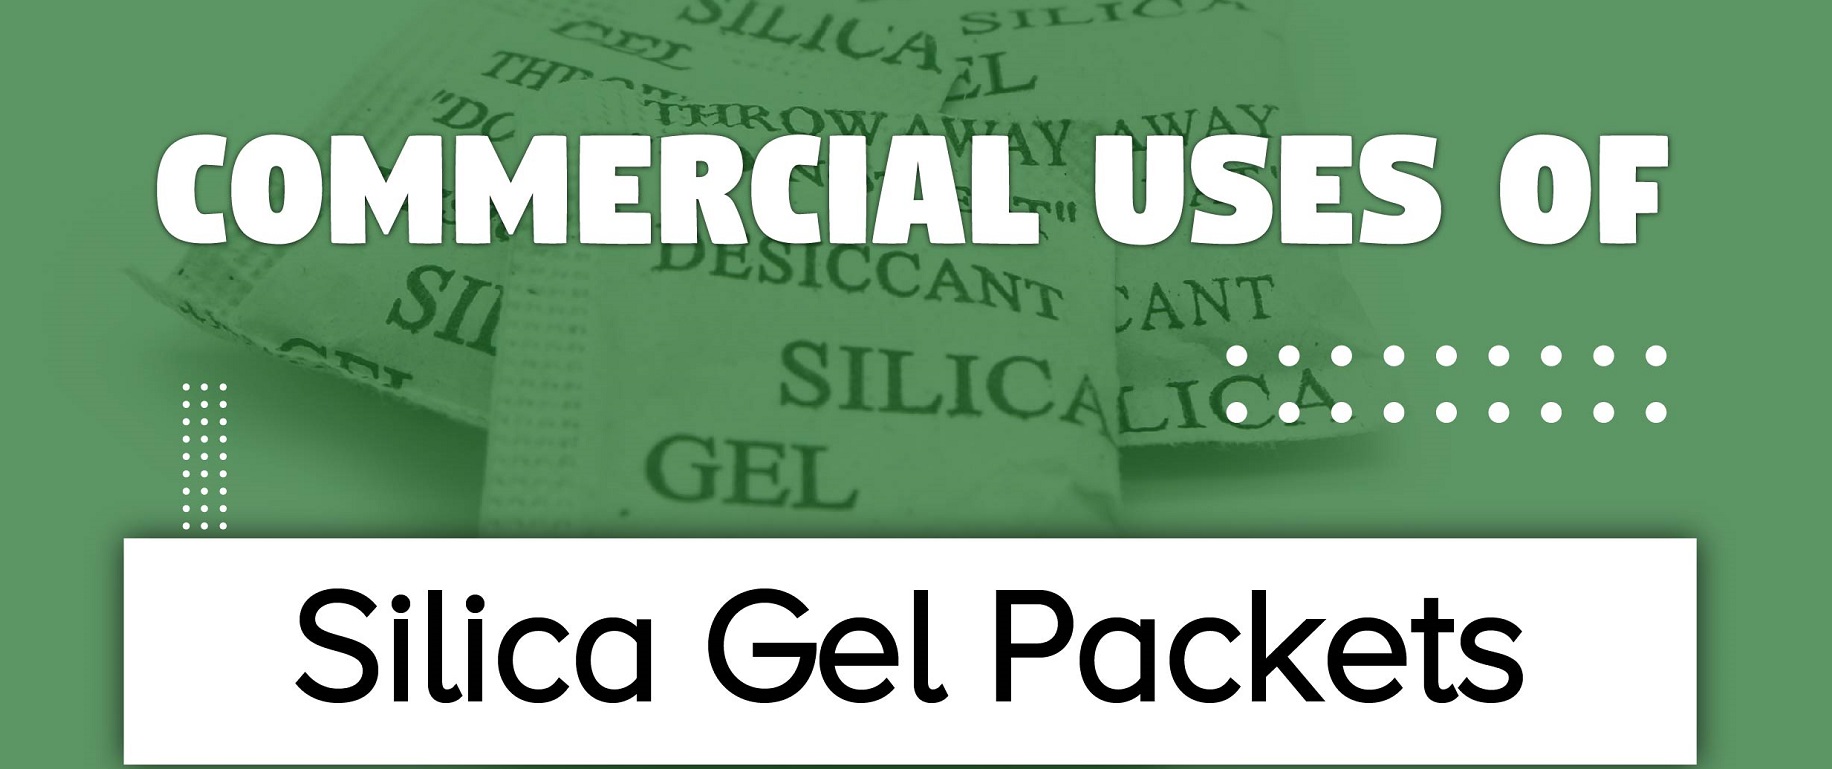 Commercial Uses of Silica Gel Packets